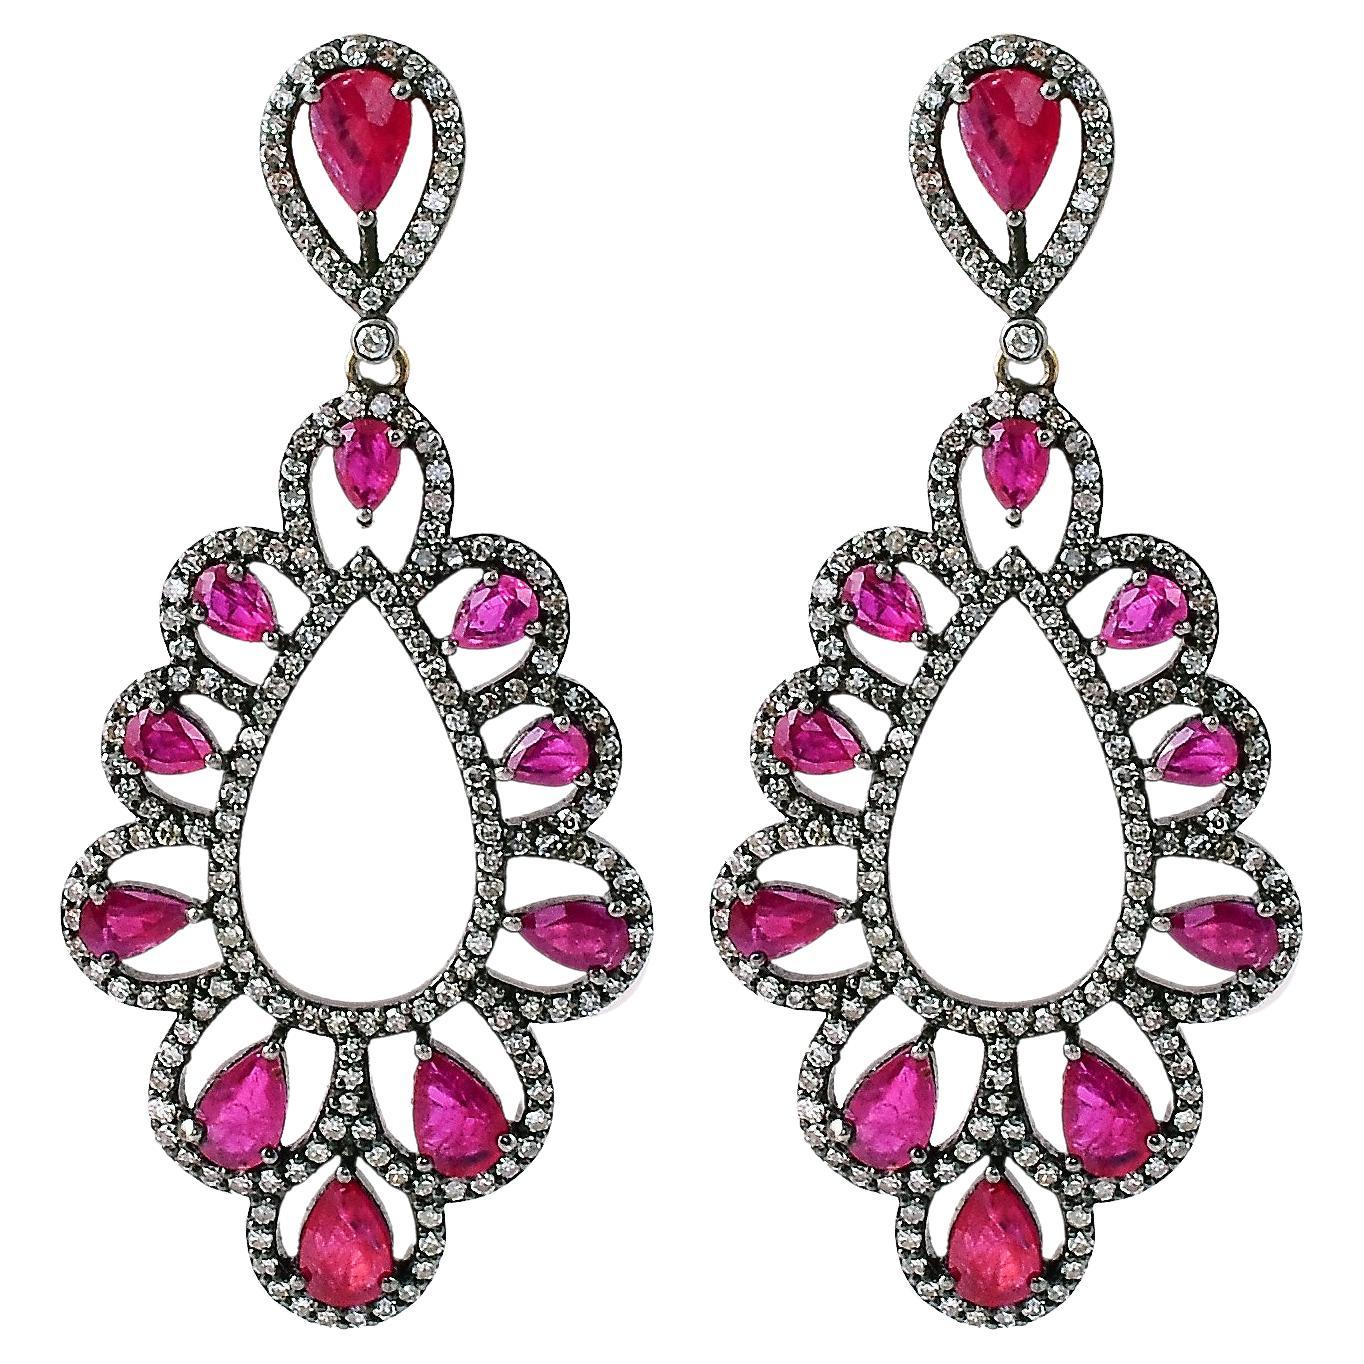 Victorian Style Diamond and Ruby Dangle Earrings